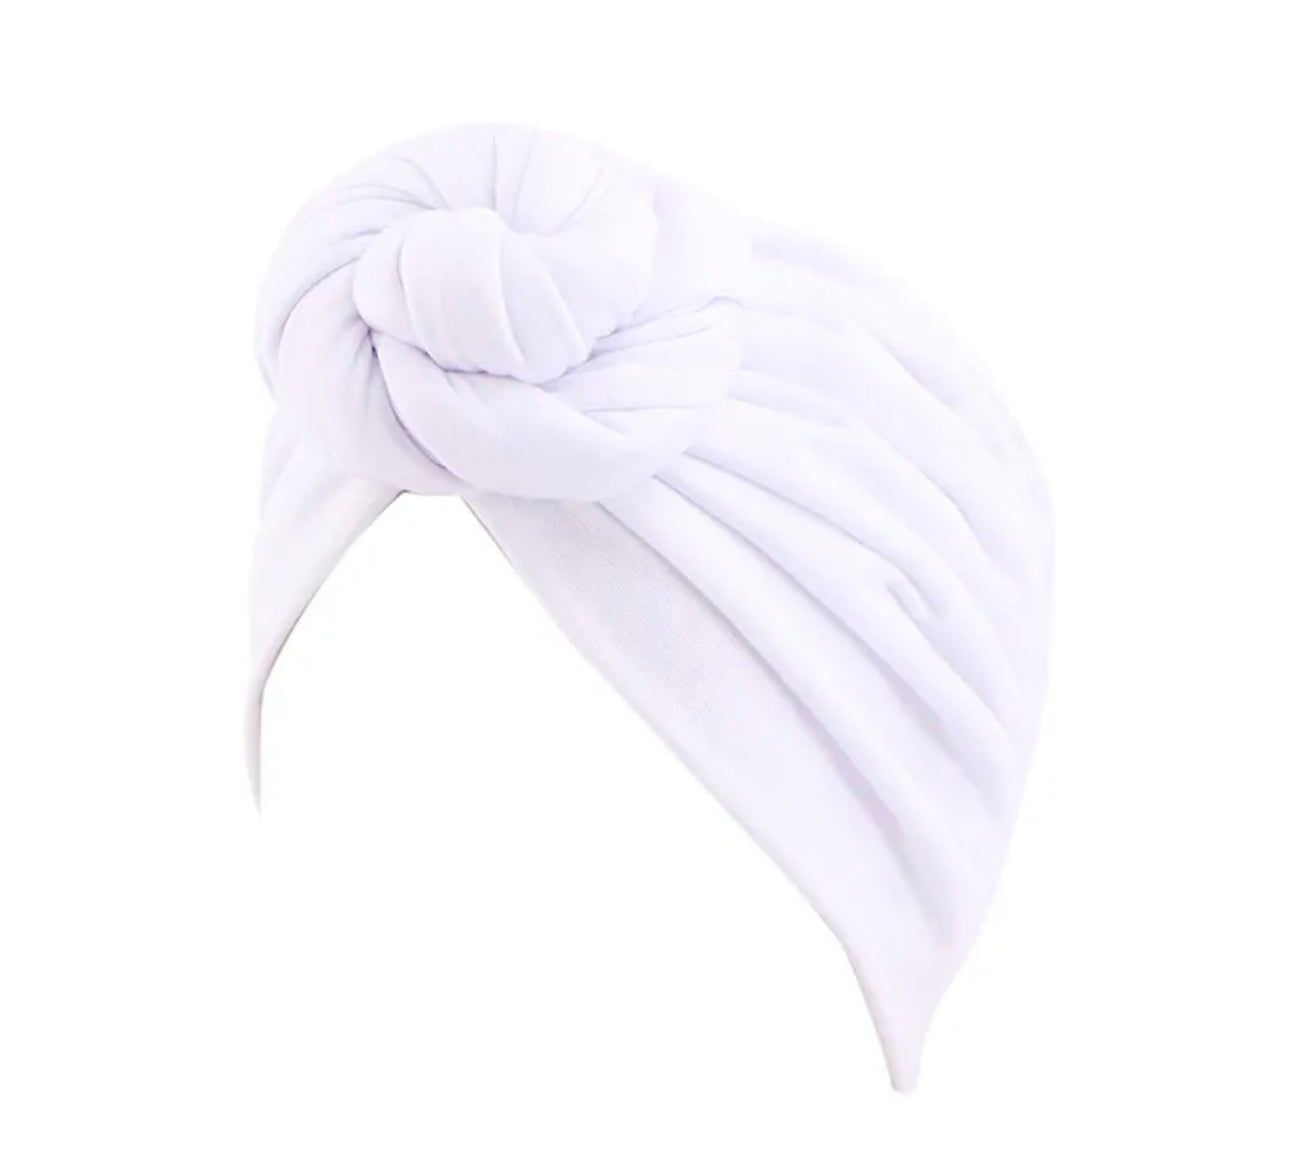 Pre-Tied Double Twisted Knot Stretch Soft Fabric Ready to Wear Turban Caps